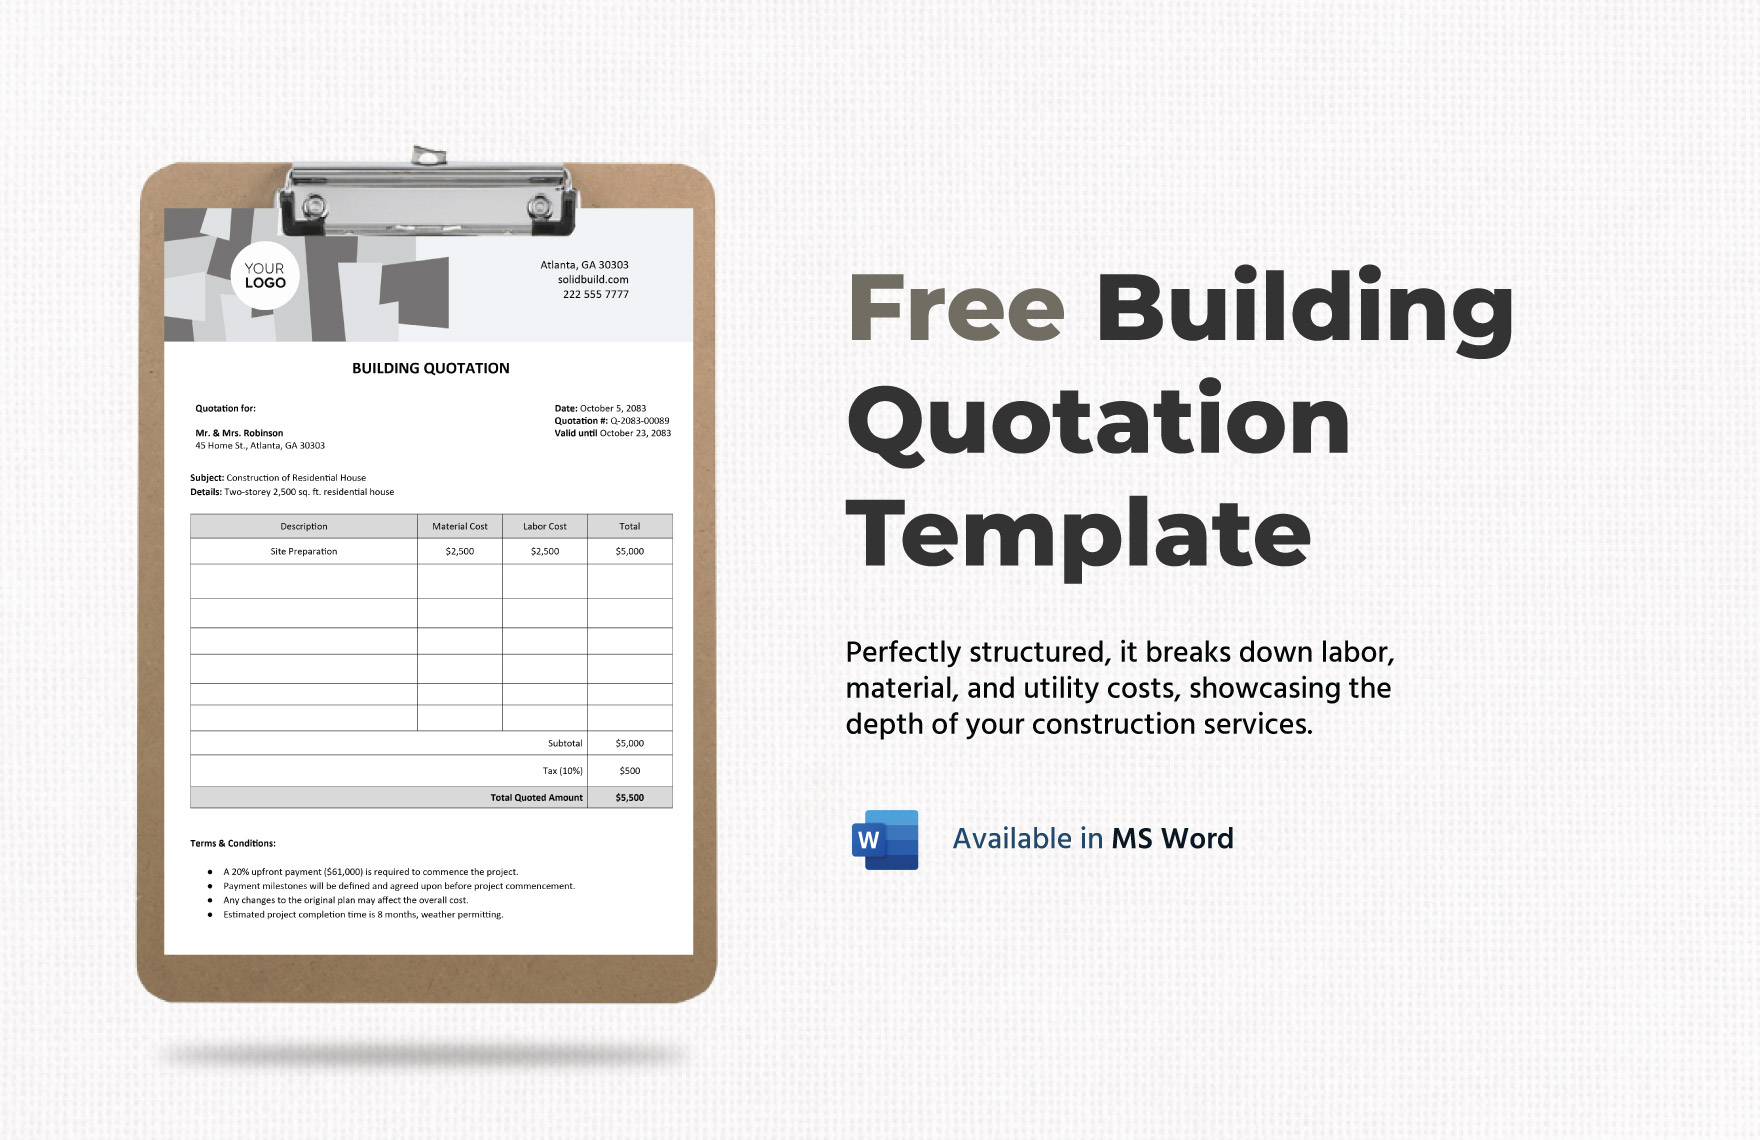 Free Building Quotation Template